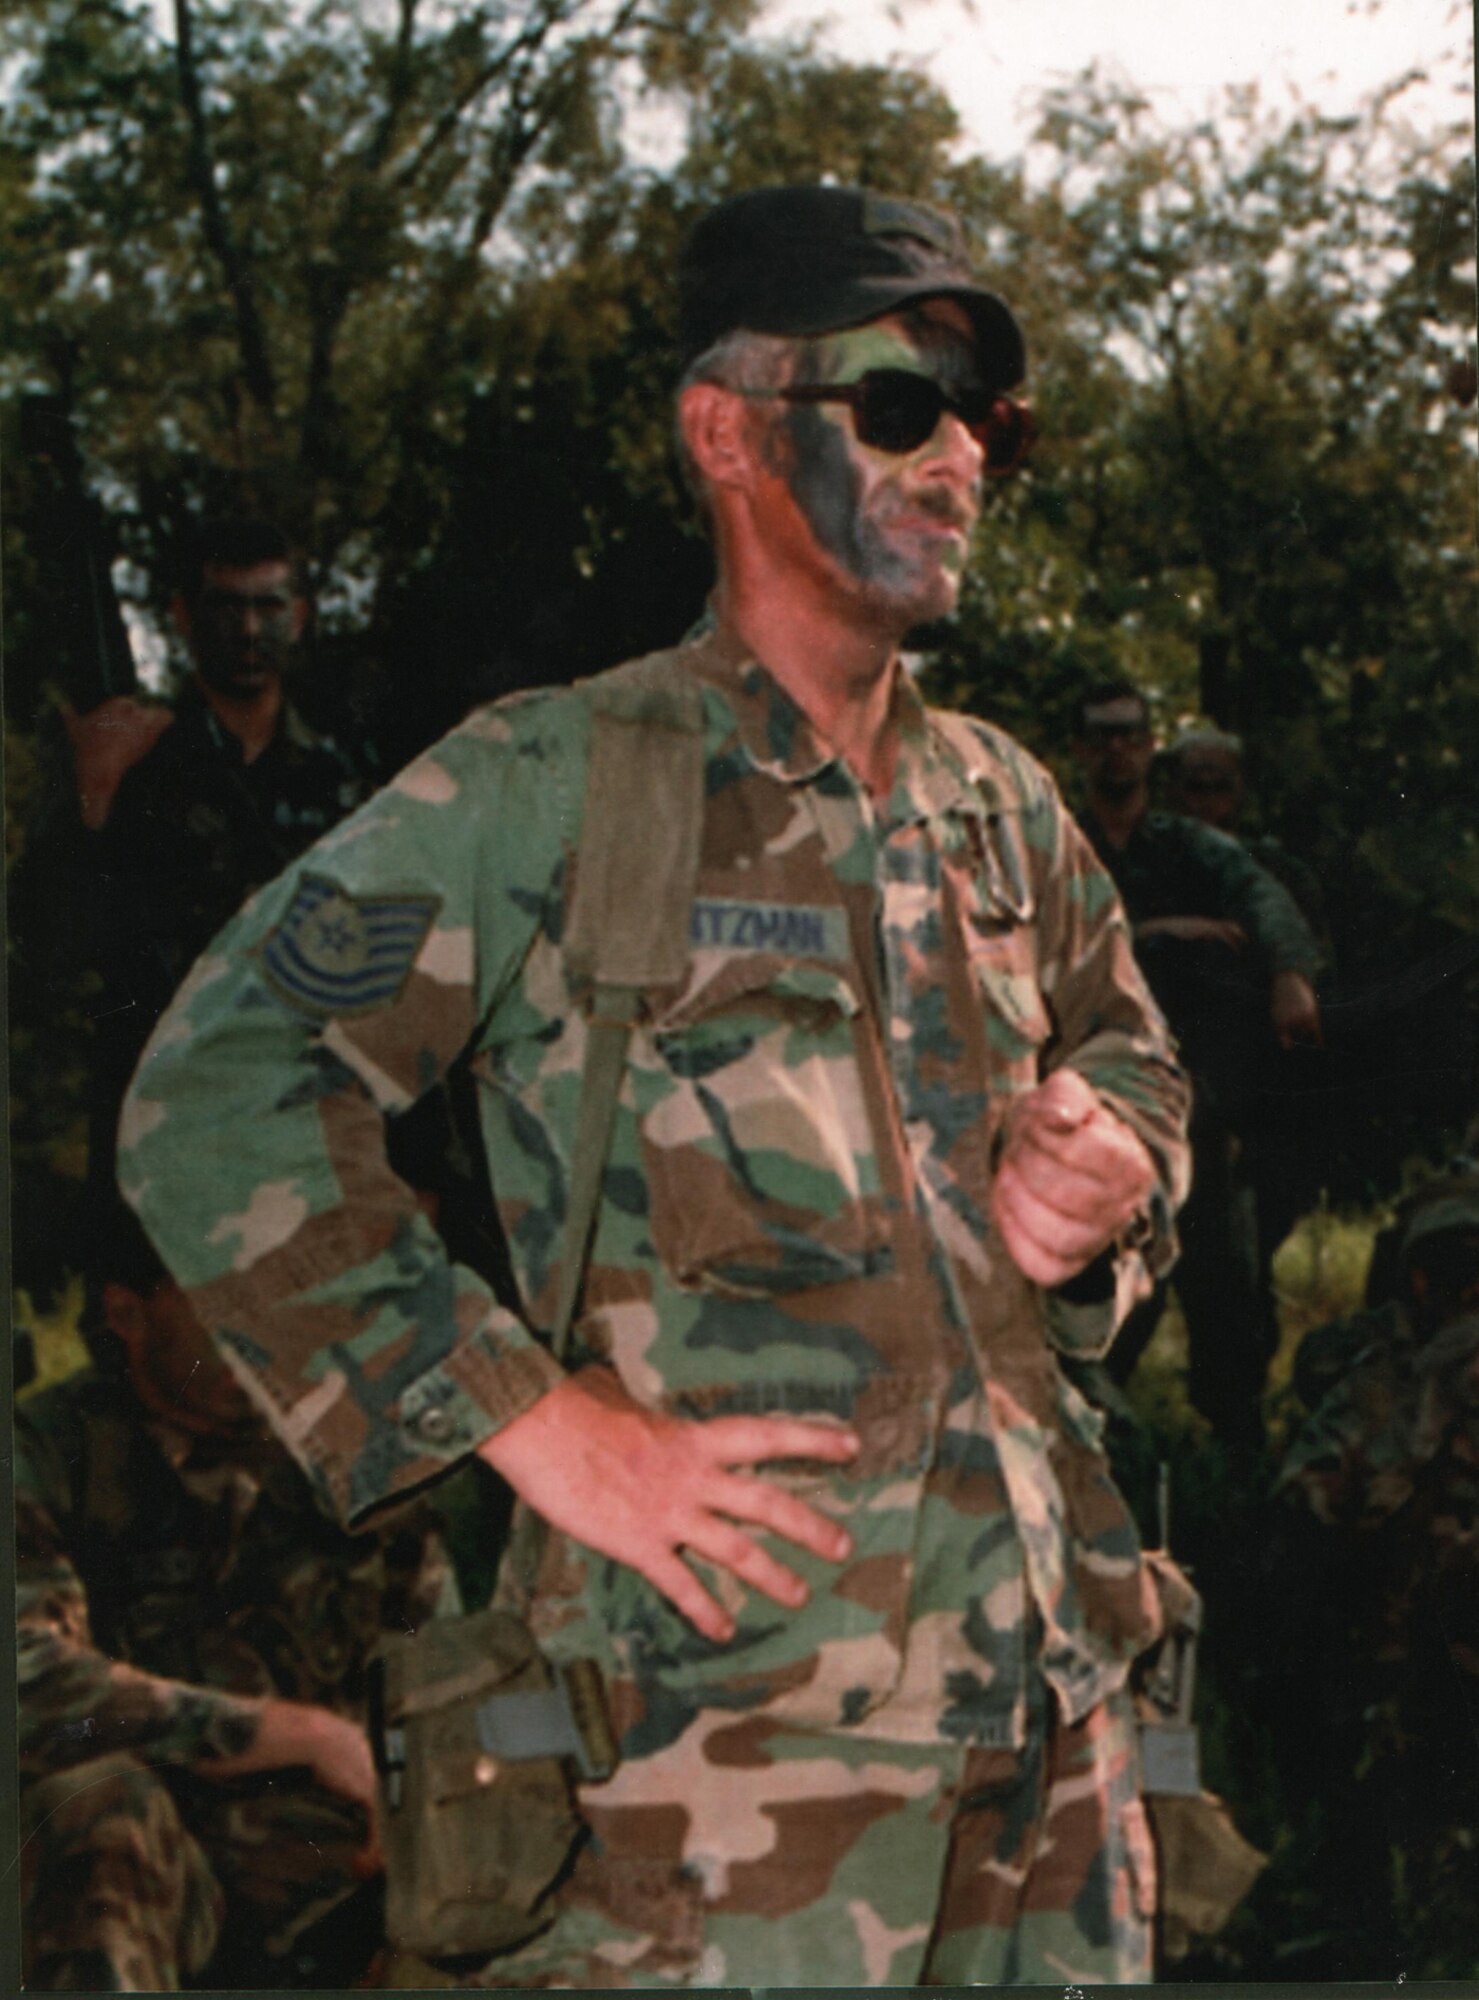 Former Tech. Sgt. Reynolds A. Kuntzman is all ready with warrior paint while working in the field as a member of the then-Air Mobility Warfare Center's 421st Ground Combat Readiness Squadron in 1995 on a Fort Dix, N.J., range.  Sergeant Kuntzman died on June 9, 1995.  After his death, the center's leadership created the Reynolds A. Kuntzman Duty Performance Award given annually to an Airman in the grades of E-1 through E-6 recognizing superior duty performance in support of the center's mission and community.  (Photo courtesy of the Kuntzman family)